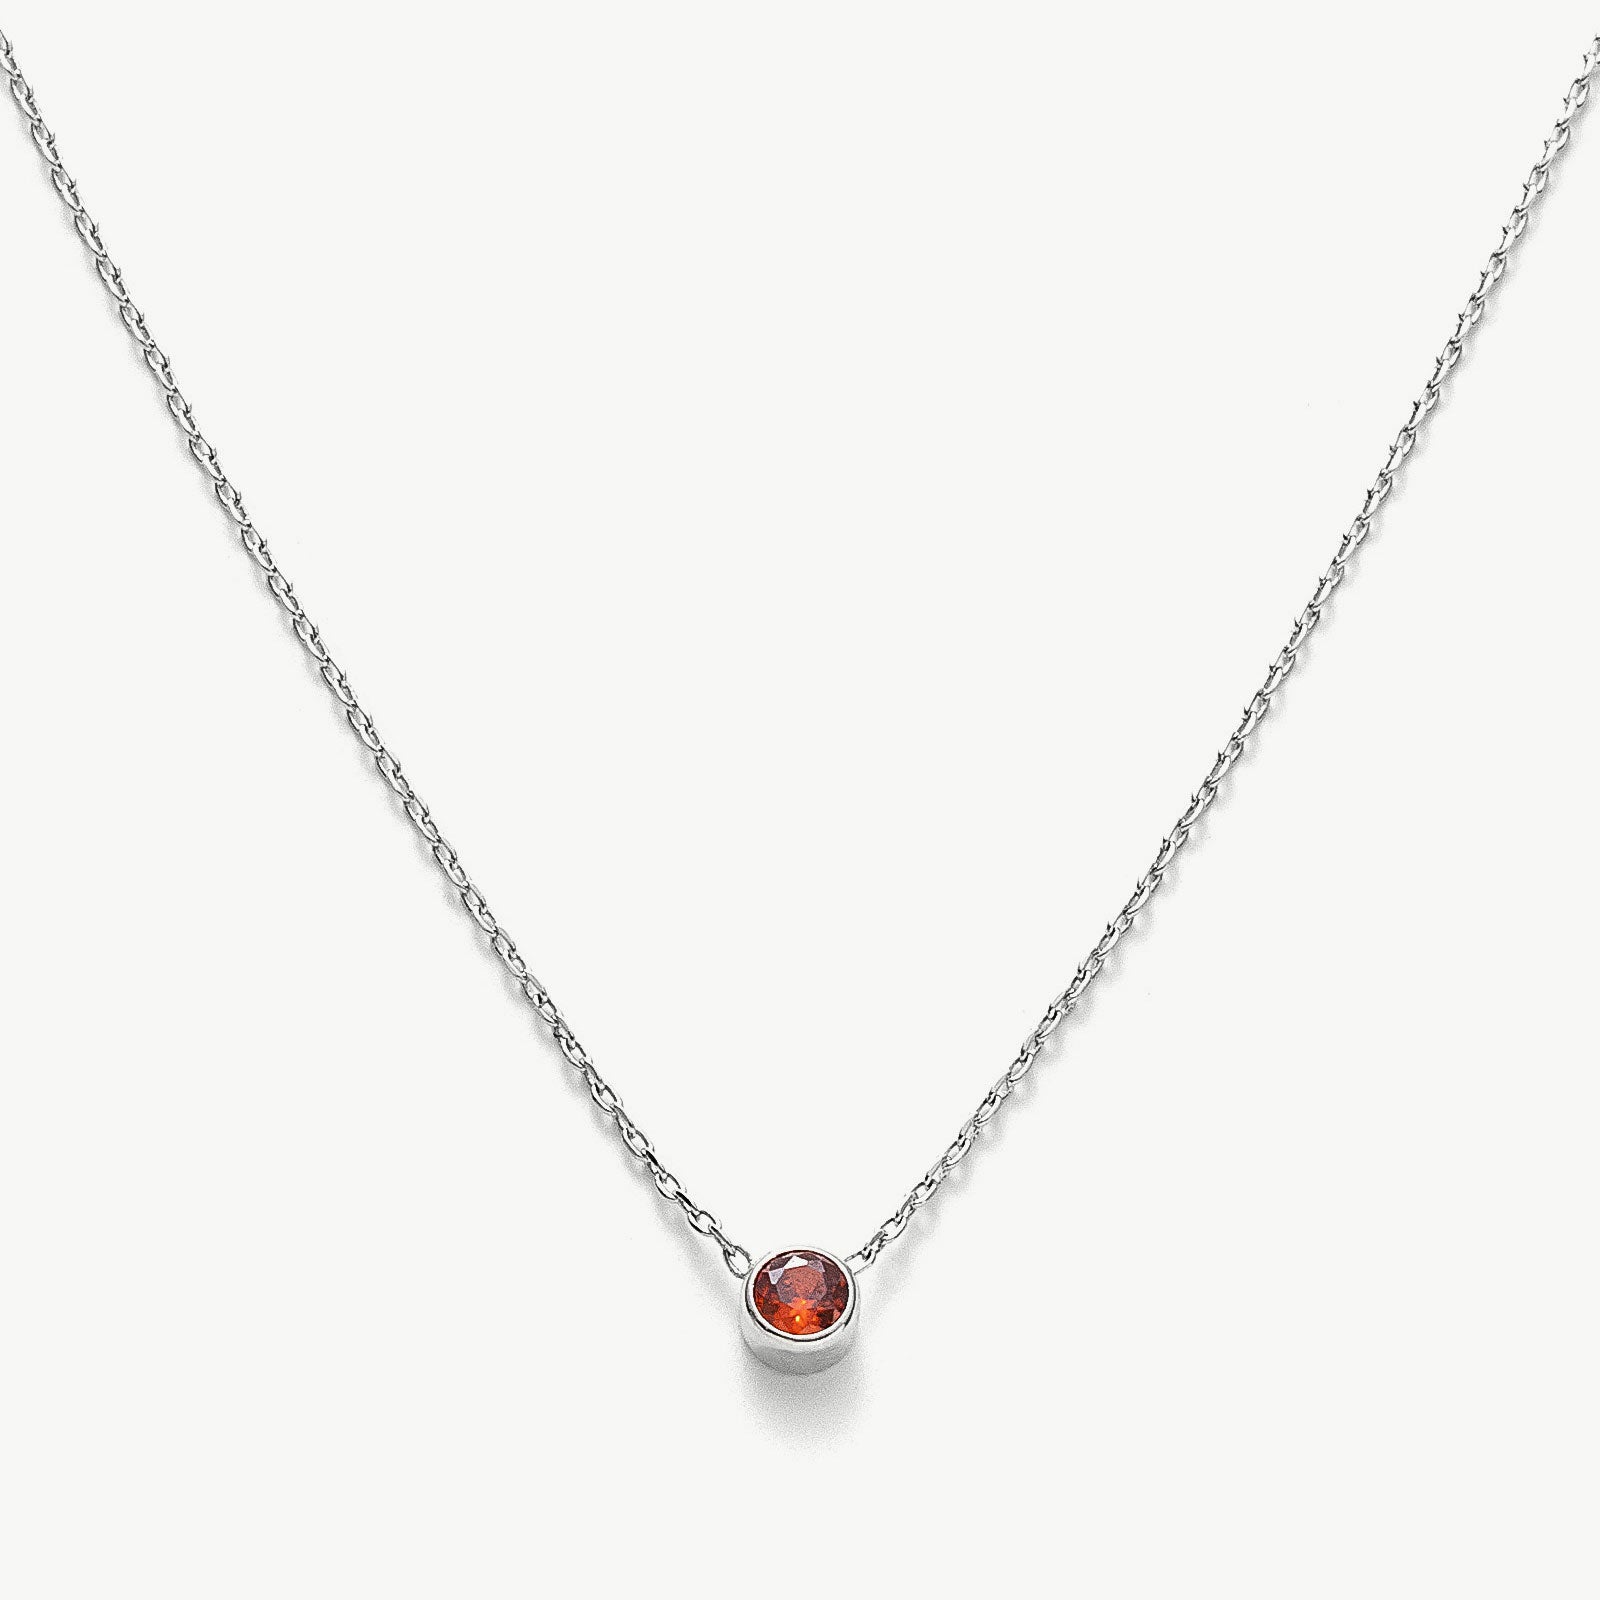 Platinum Ruby Crystal Pendant Necklace, radiating eternal ruby radiance, this necklace features a captivating crystal pendant suspended from a delicate platinum chain, expressing enduring style and grace